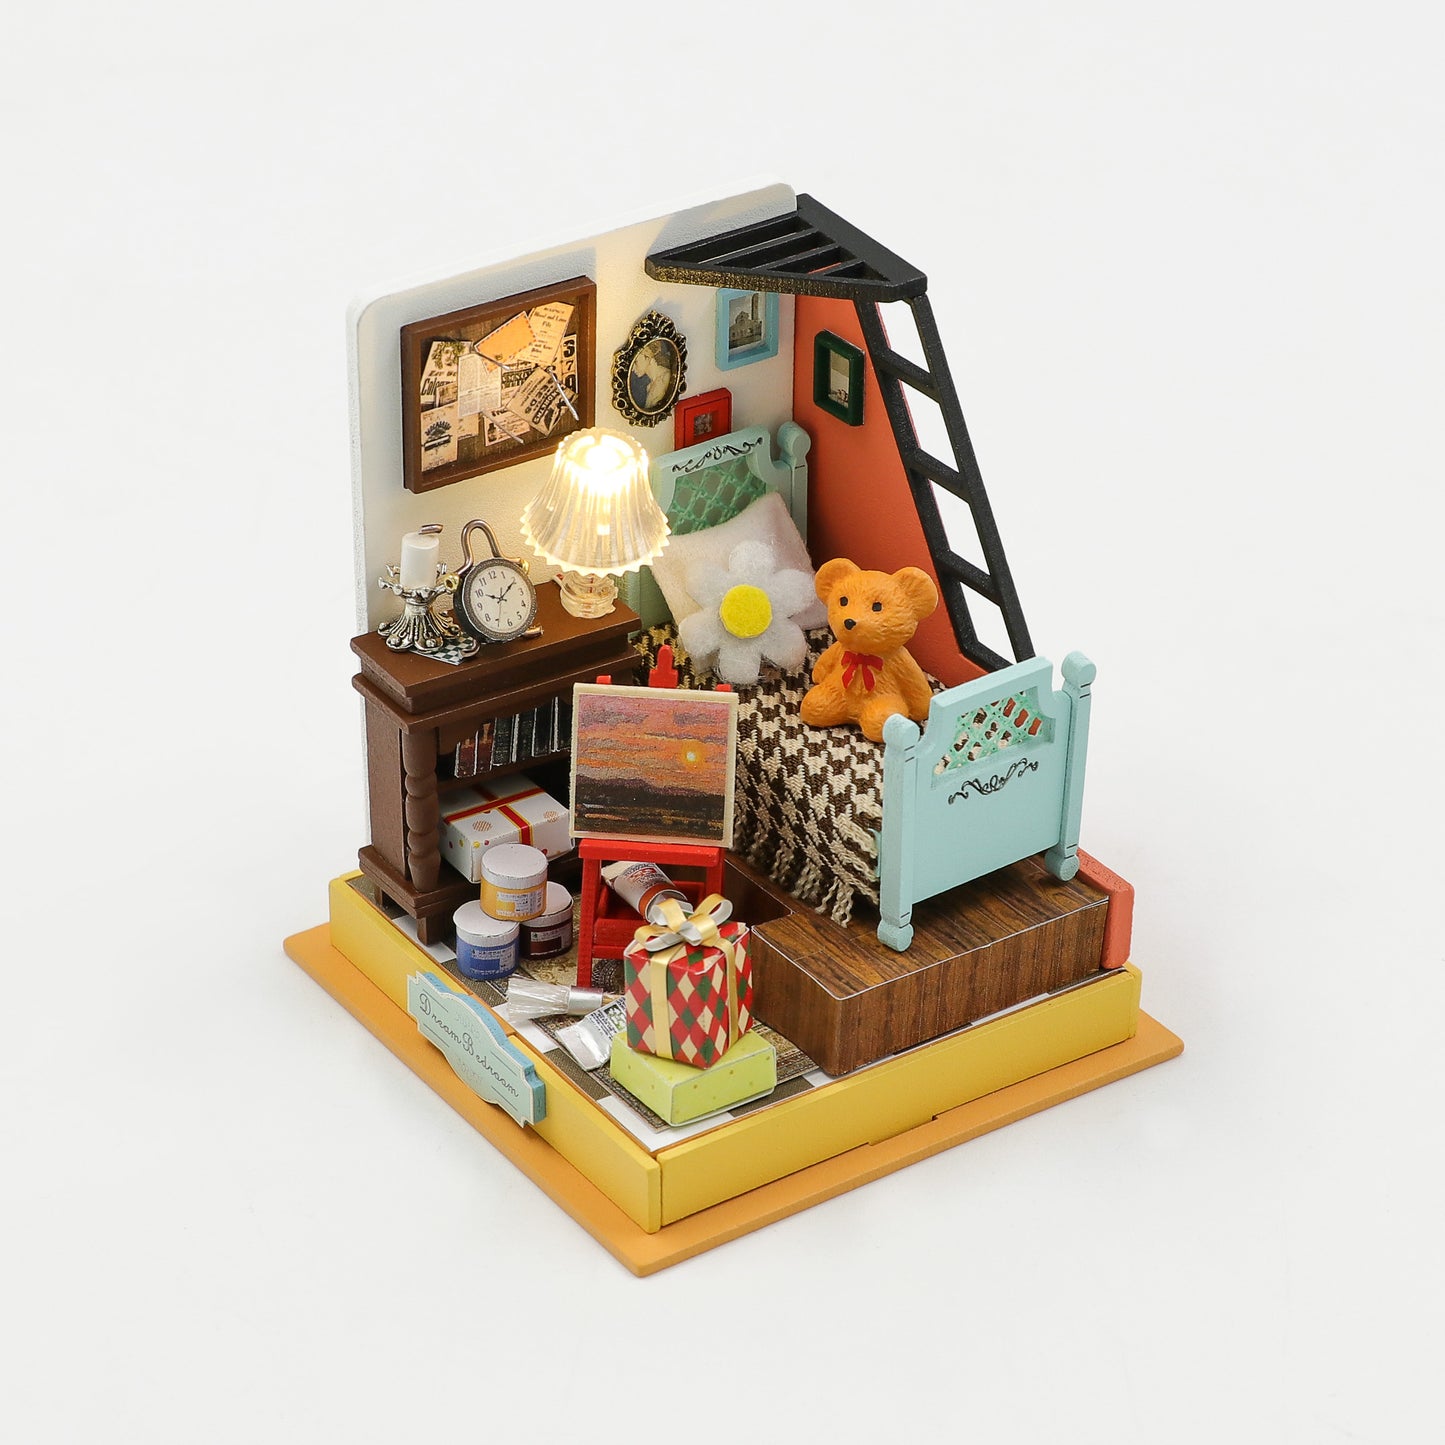 DIY "Dream Bedroom" S2302 Dollhouse Furniture Wooden Miniature Dollhouse w/ LEDs and Dust Proof Cover Toy Kits Fun Crafts